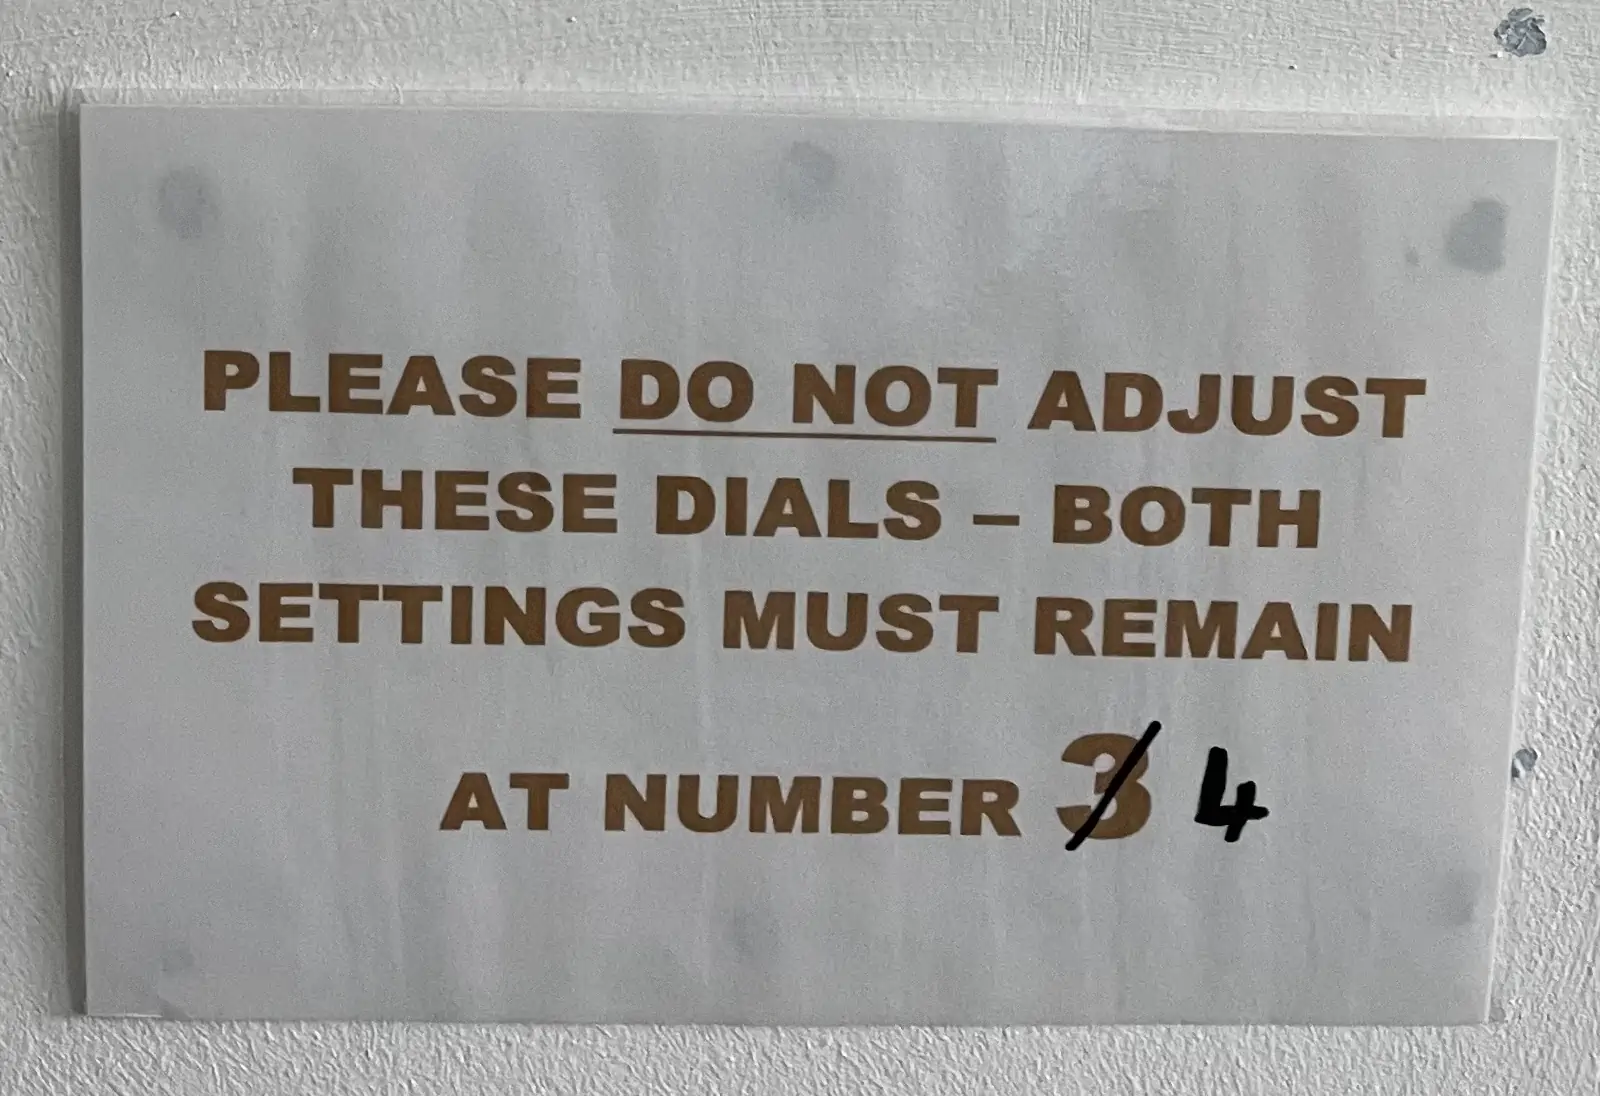 Note that says not to adjust the dials as both setting must remain at number 3, which has been crossed out and replaced with 4.